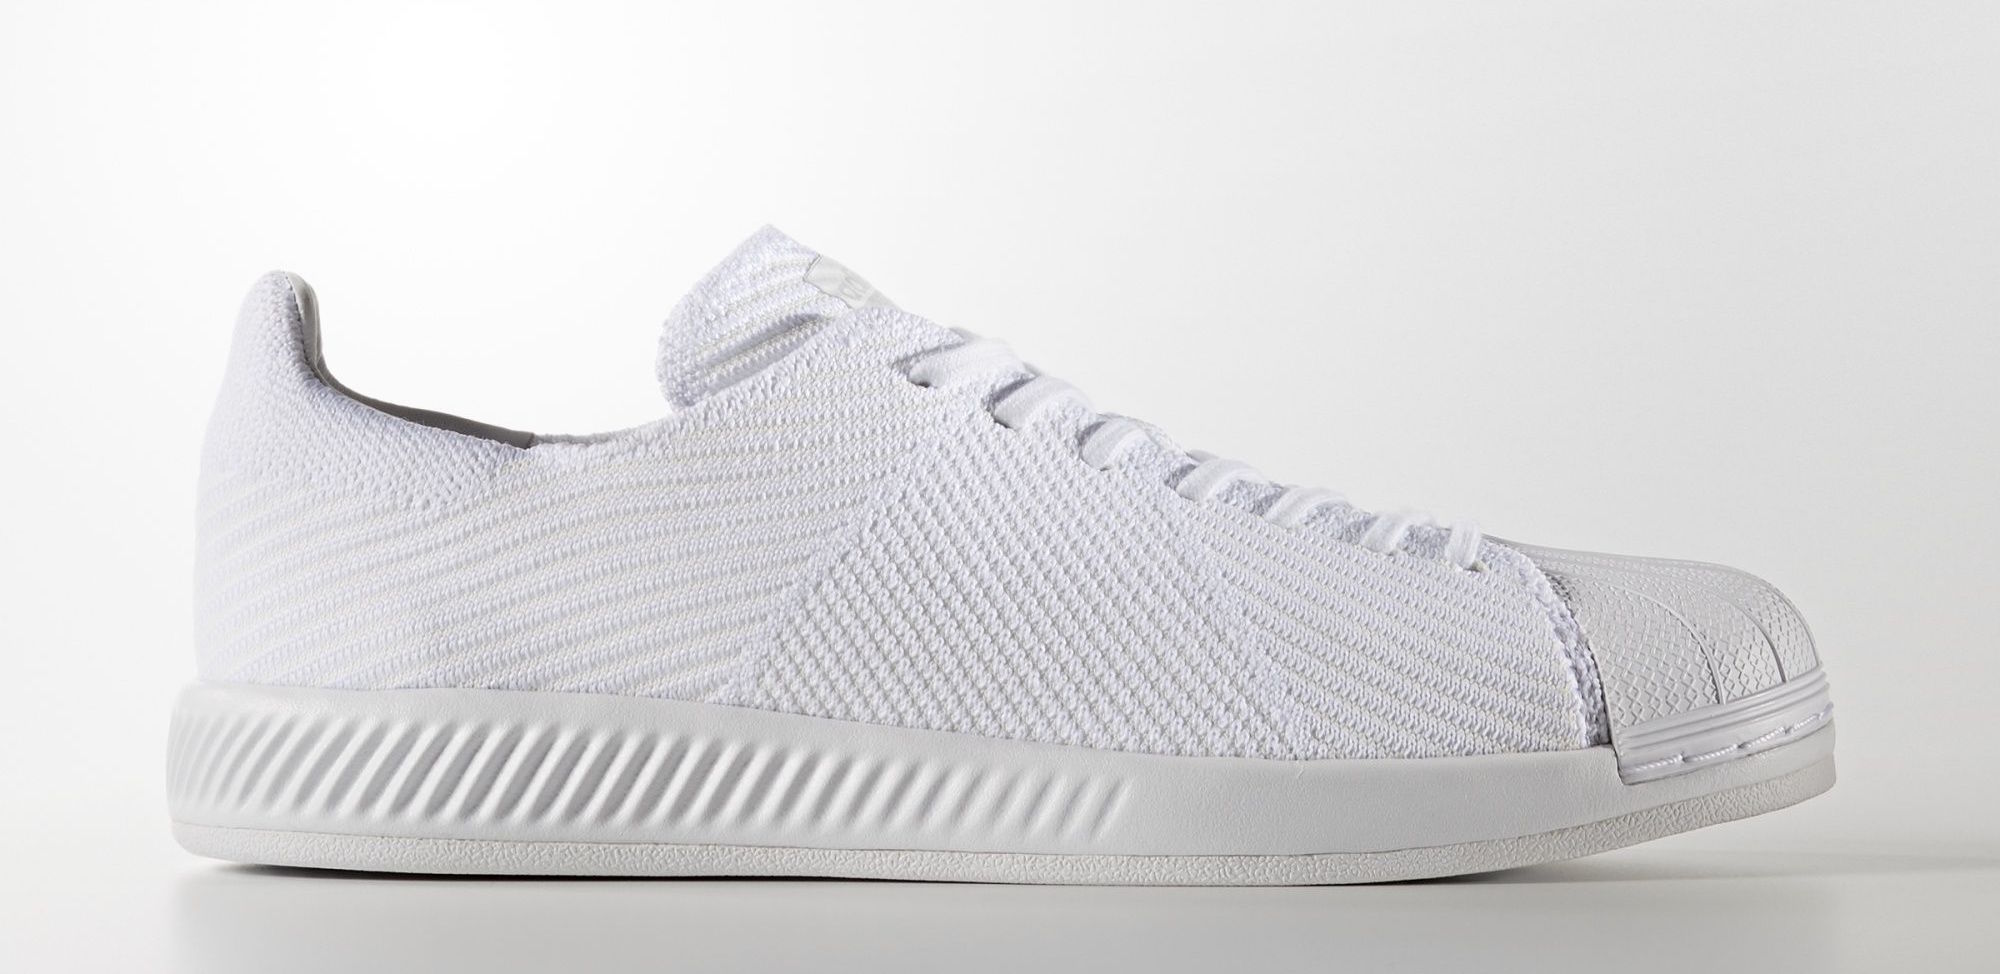 The adidas Superstar to Feature Bounce and Primeknit - WearTesters